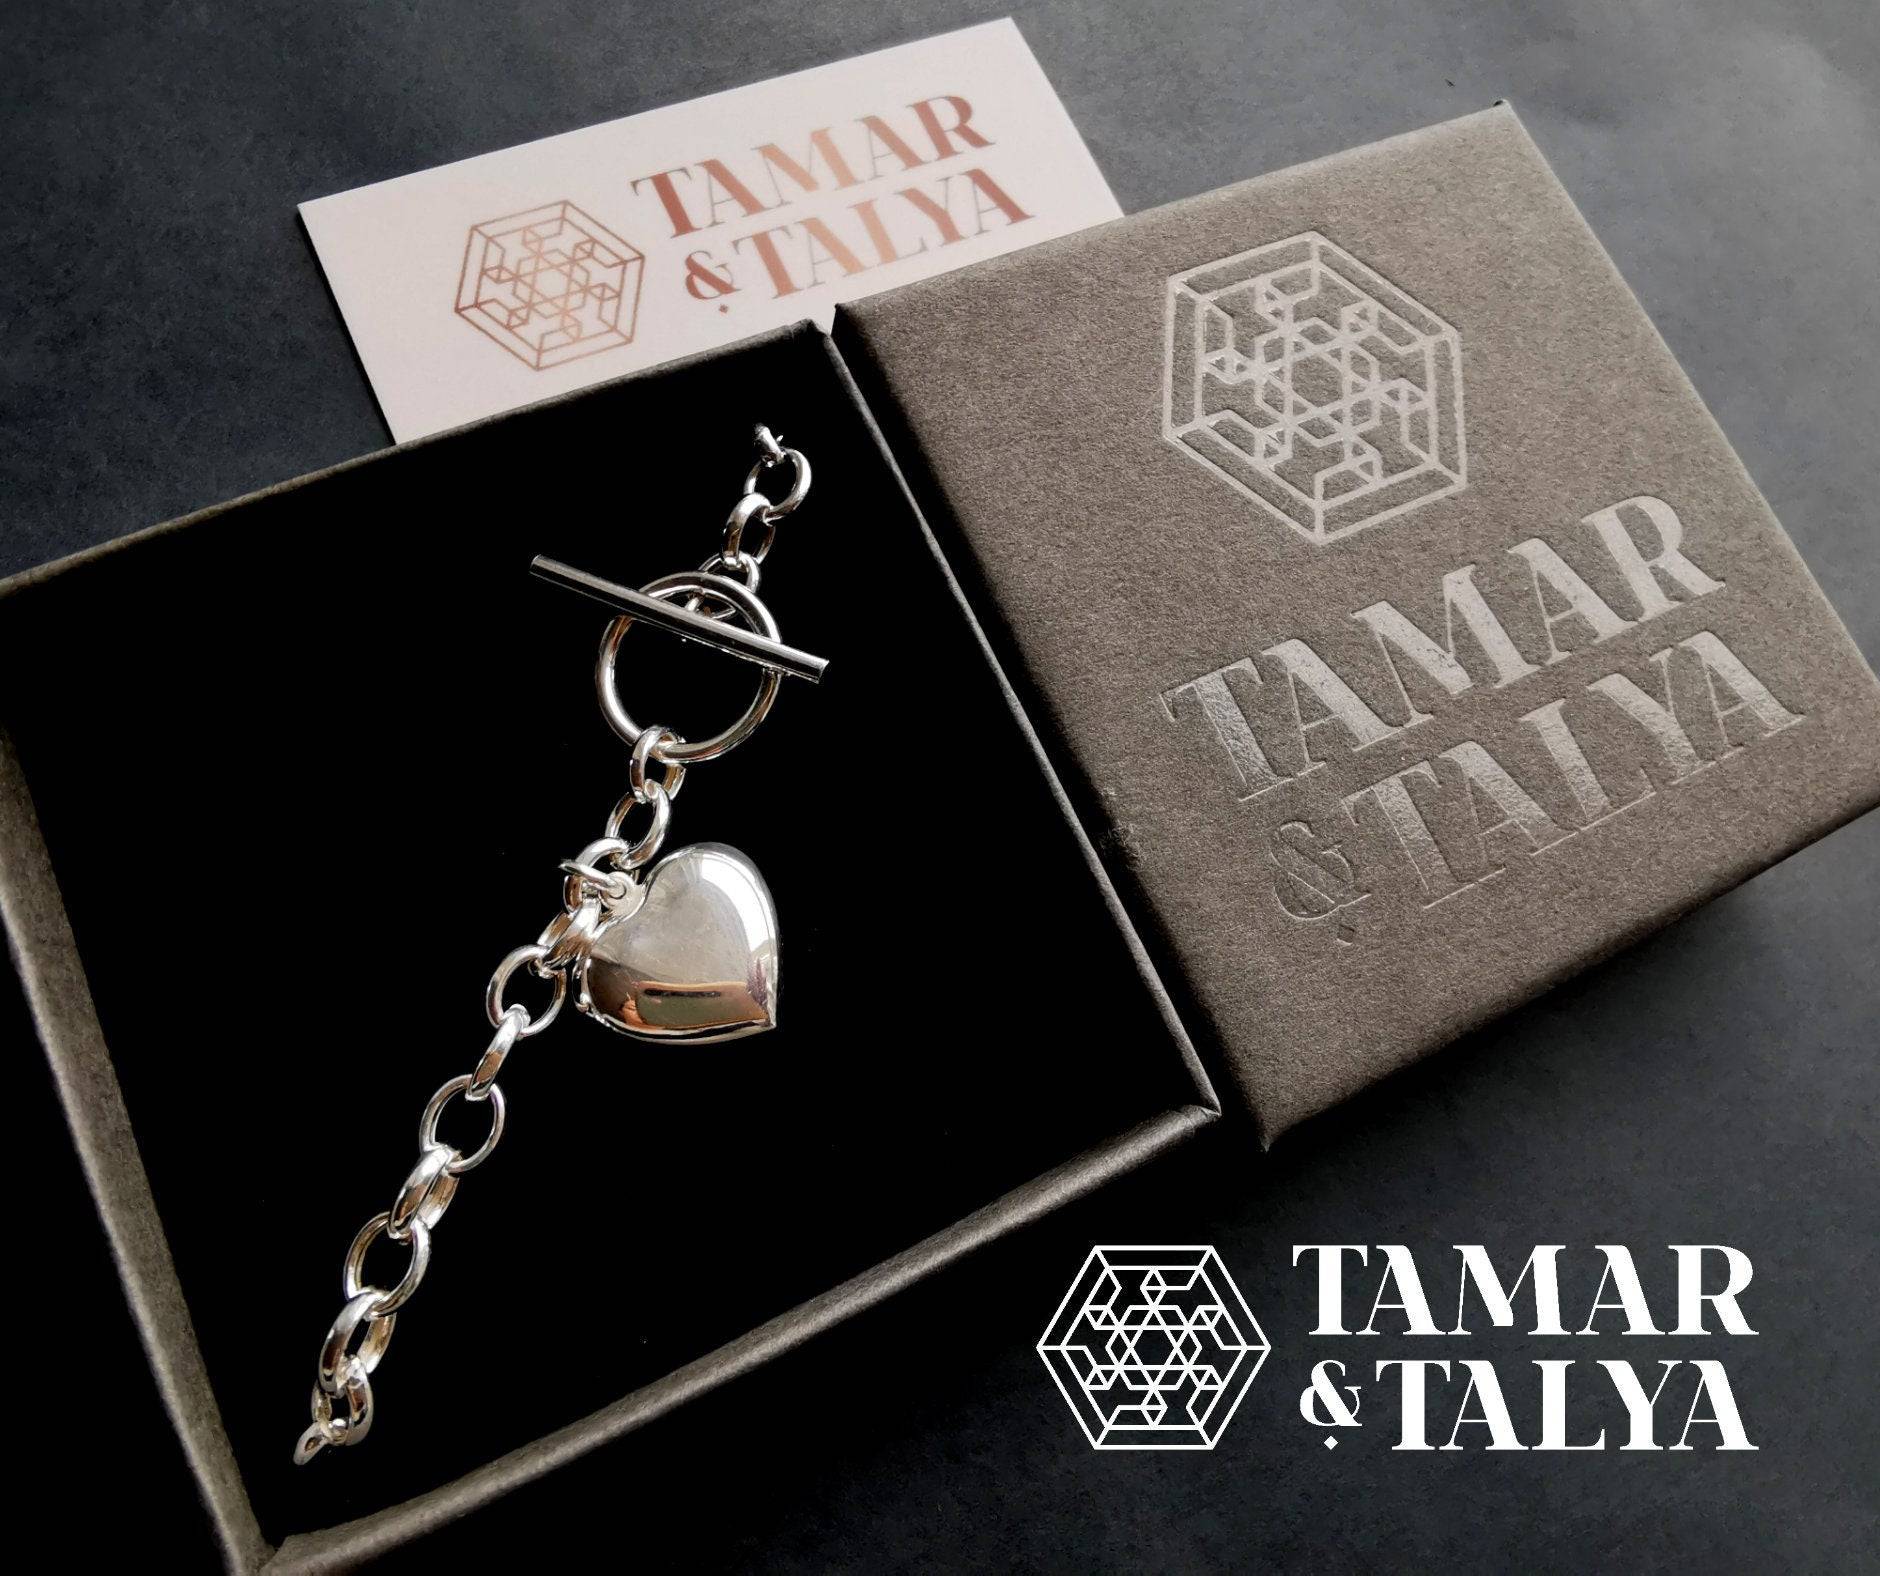 Heart bracelet with t bar fitting - Tamar and Talya